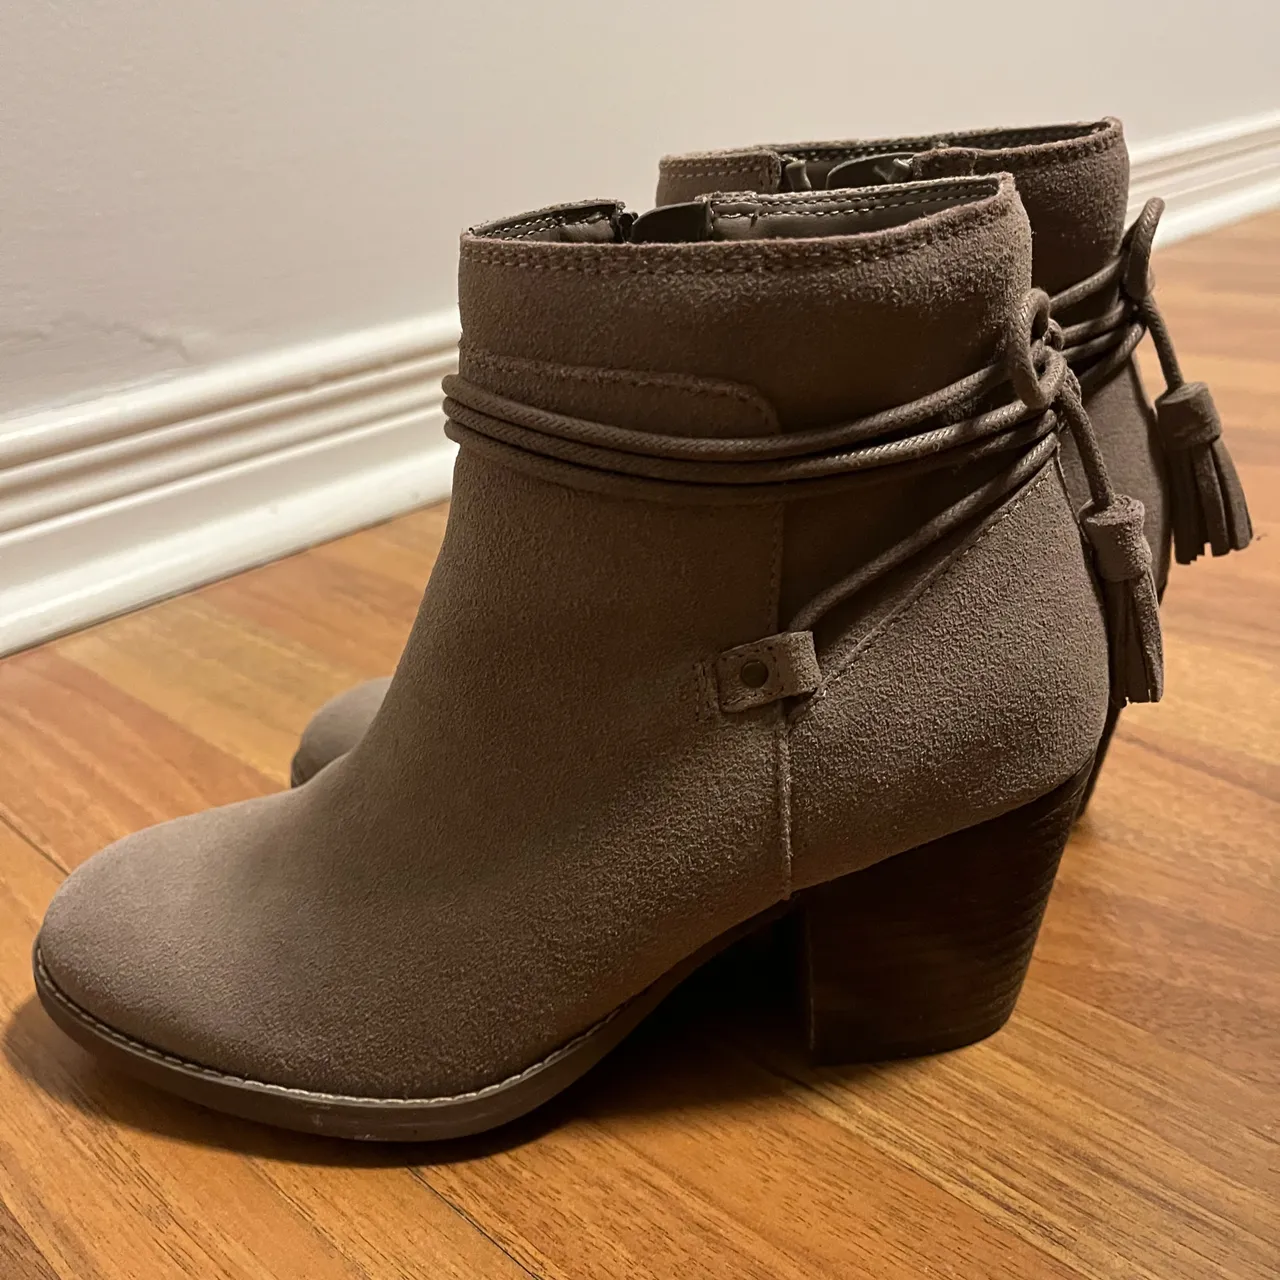 Skechers suede ankle boots photo 1